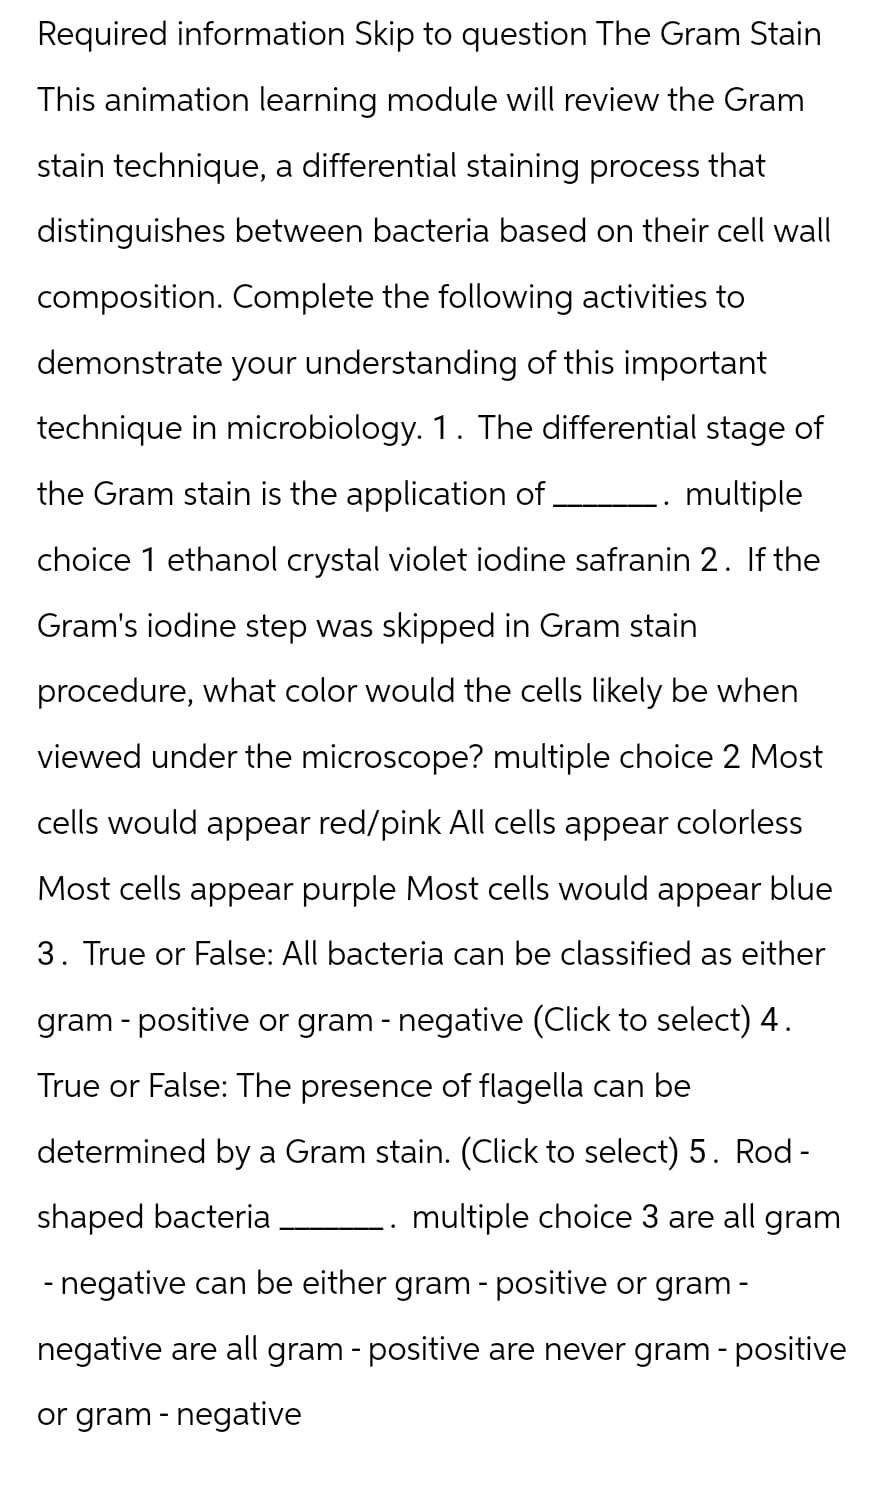 Required information Skip to question The Gram Stain
This animation learning module will review the Gram
stain technique, a differential staining process that
distinguishes between bacteria based on their cell wall
composition. Complete the following activities to
demonstrate your understanding of this important
technique in microbiology. 1. The differential stage of
the Gram stain is the application of .
multiple
choice 1 ethanol crystal violet iodine safranin 2. If the
Gram's iodine step was skipped in Gram stain
procedure, what color would the cells likely be when
viewed under the microscope? multiple choice 2 Most
cells would appear red/pink All cells appear colorless
Most cells appear purple Most cells would appear blue
3. True or False: All bacteria can be classified as either
gram-positive or gram-negative (Click to select) 4.
True or False: The presence of flagella can be
determined by a Gram stain. (Click to select) 5. Rod -
shaped bacteria
multiple choice 3 are all gram
- negative can be either gram-positive or gram-
negative are all gram-positive are never gram - positive
or gram-negative